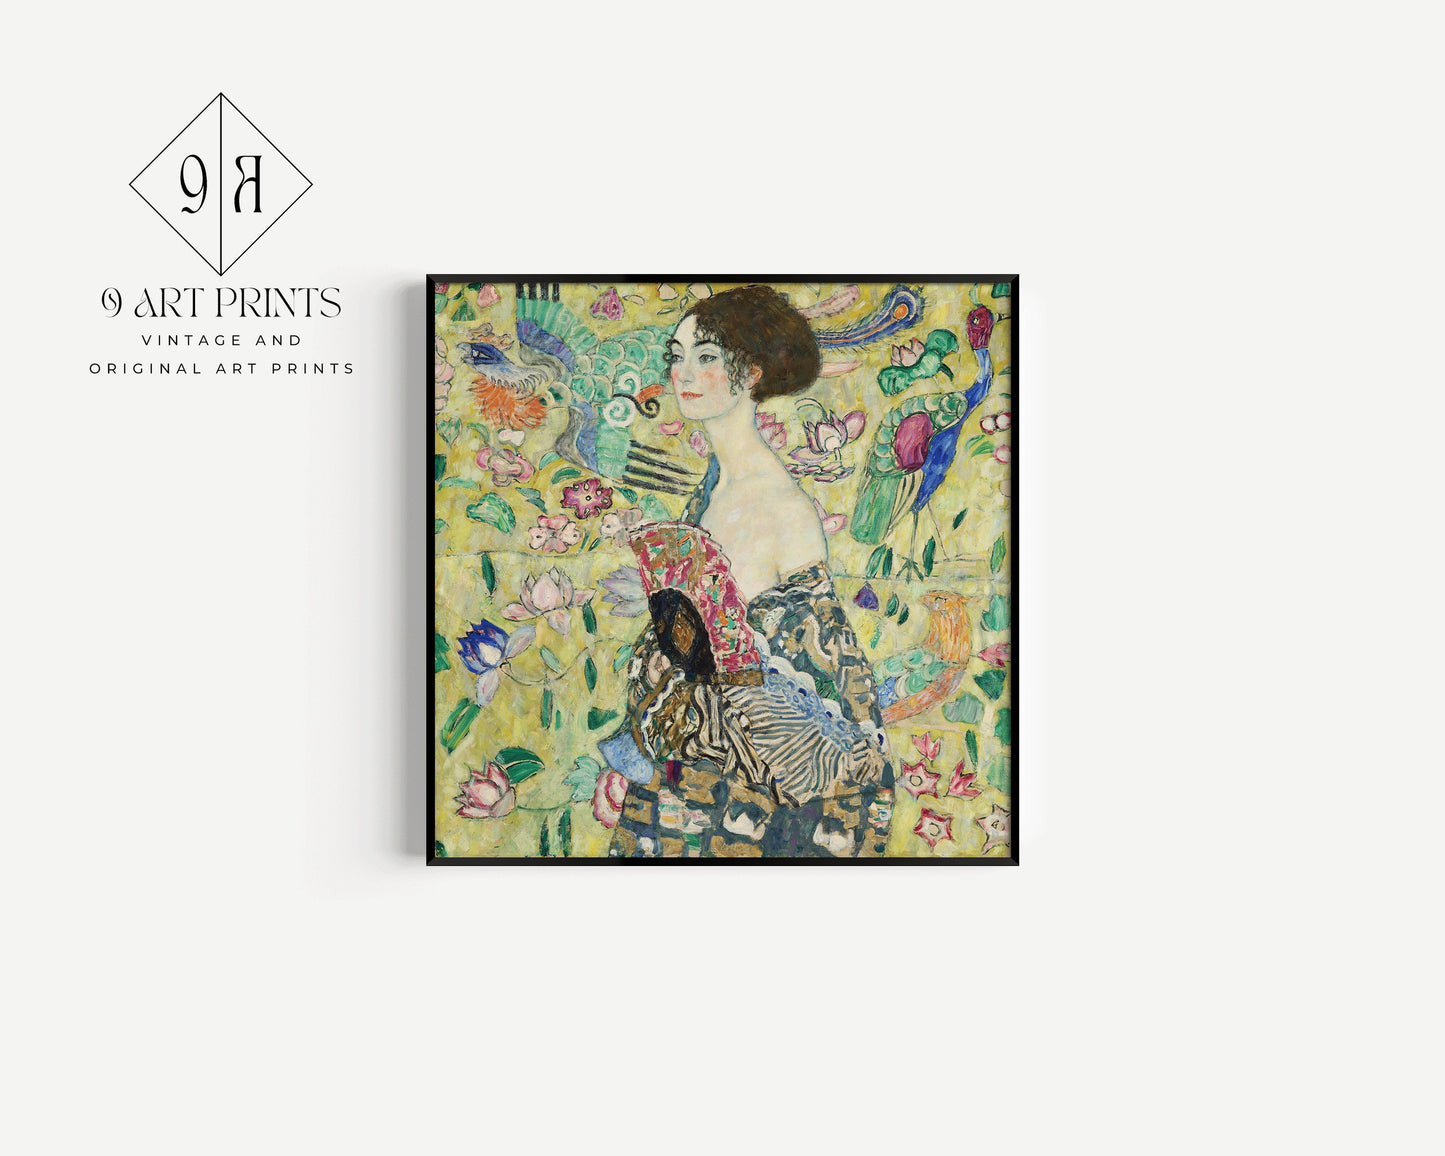 Gustav Klimt Lady With A Fan Print Poster Famous Painting artist Poster Housewarming Framed Square Gift Ready to Hang Decor Home Office